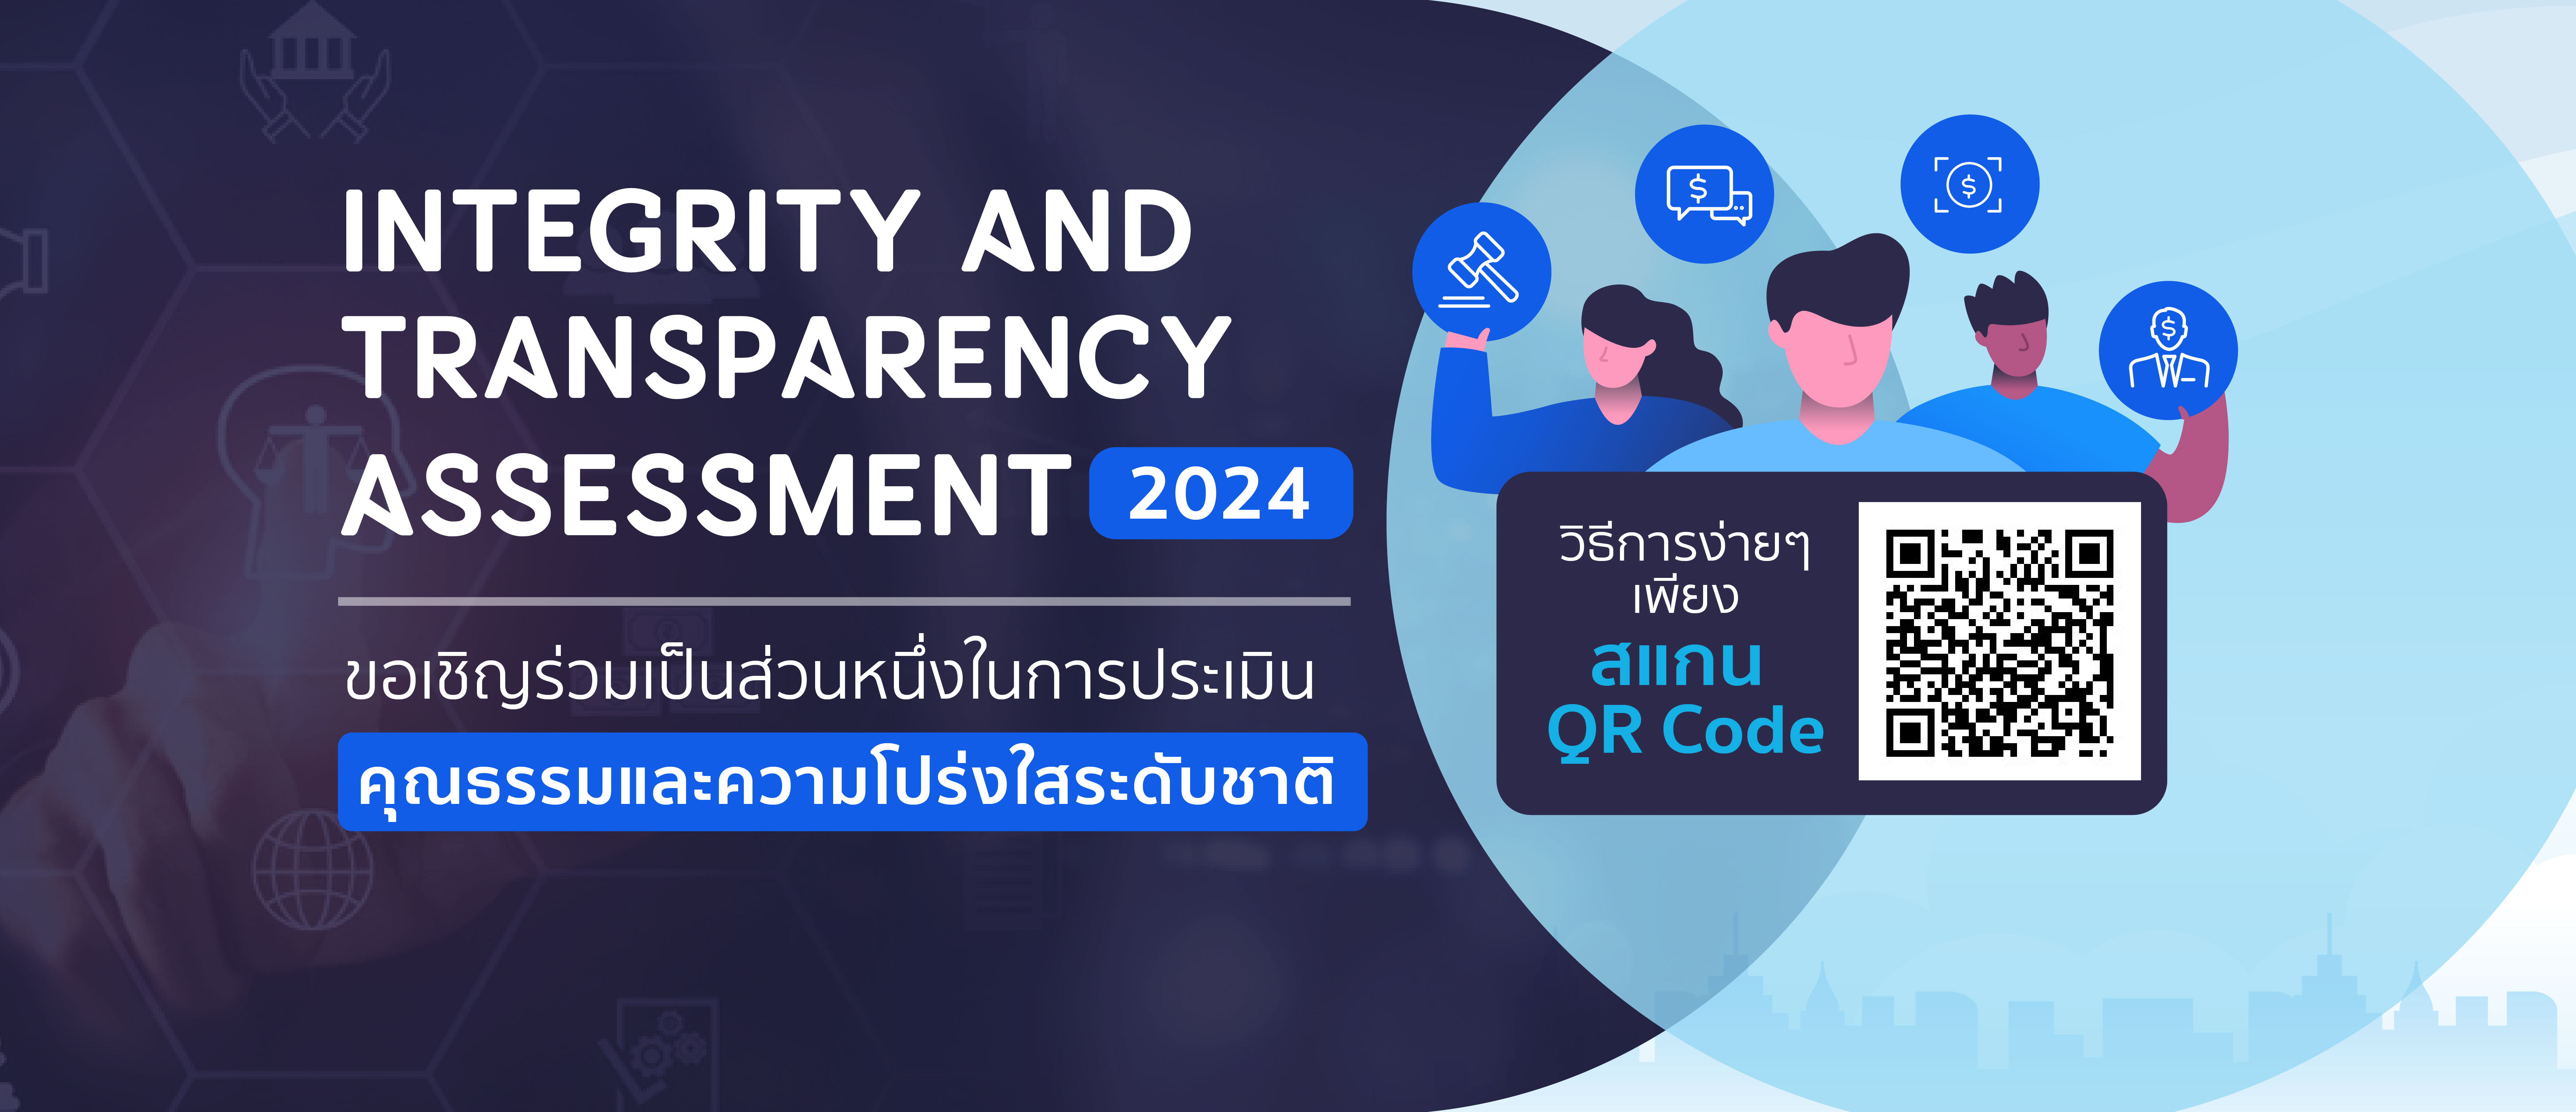 cover_web_Integrity and transparency assessment 2024.jpg